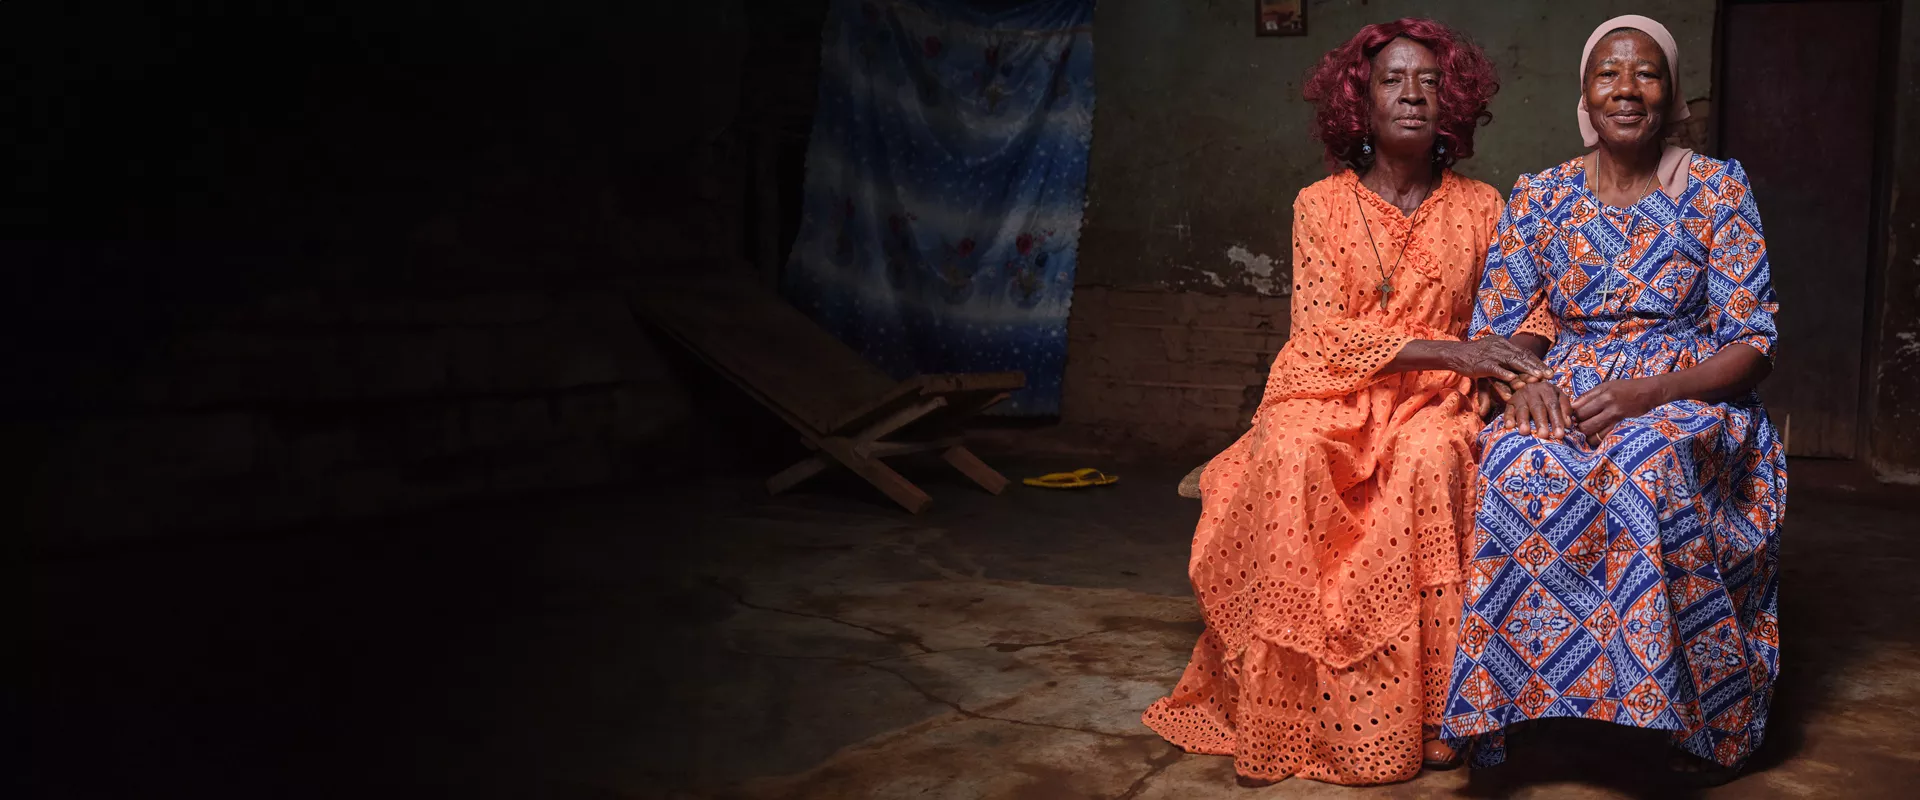 Sitting portrait of two women in colorful traditional dresses in Cameroon